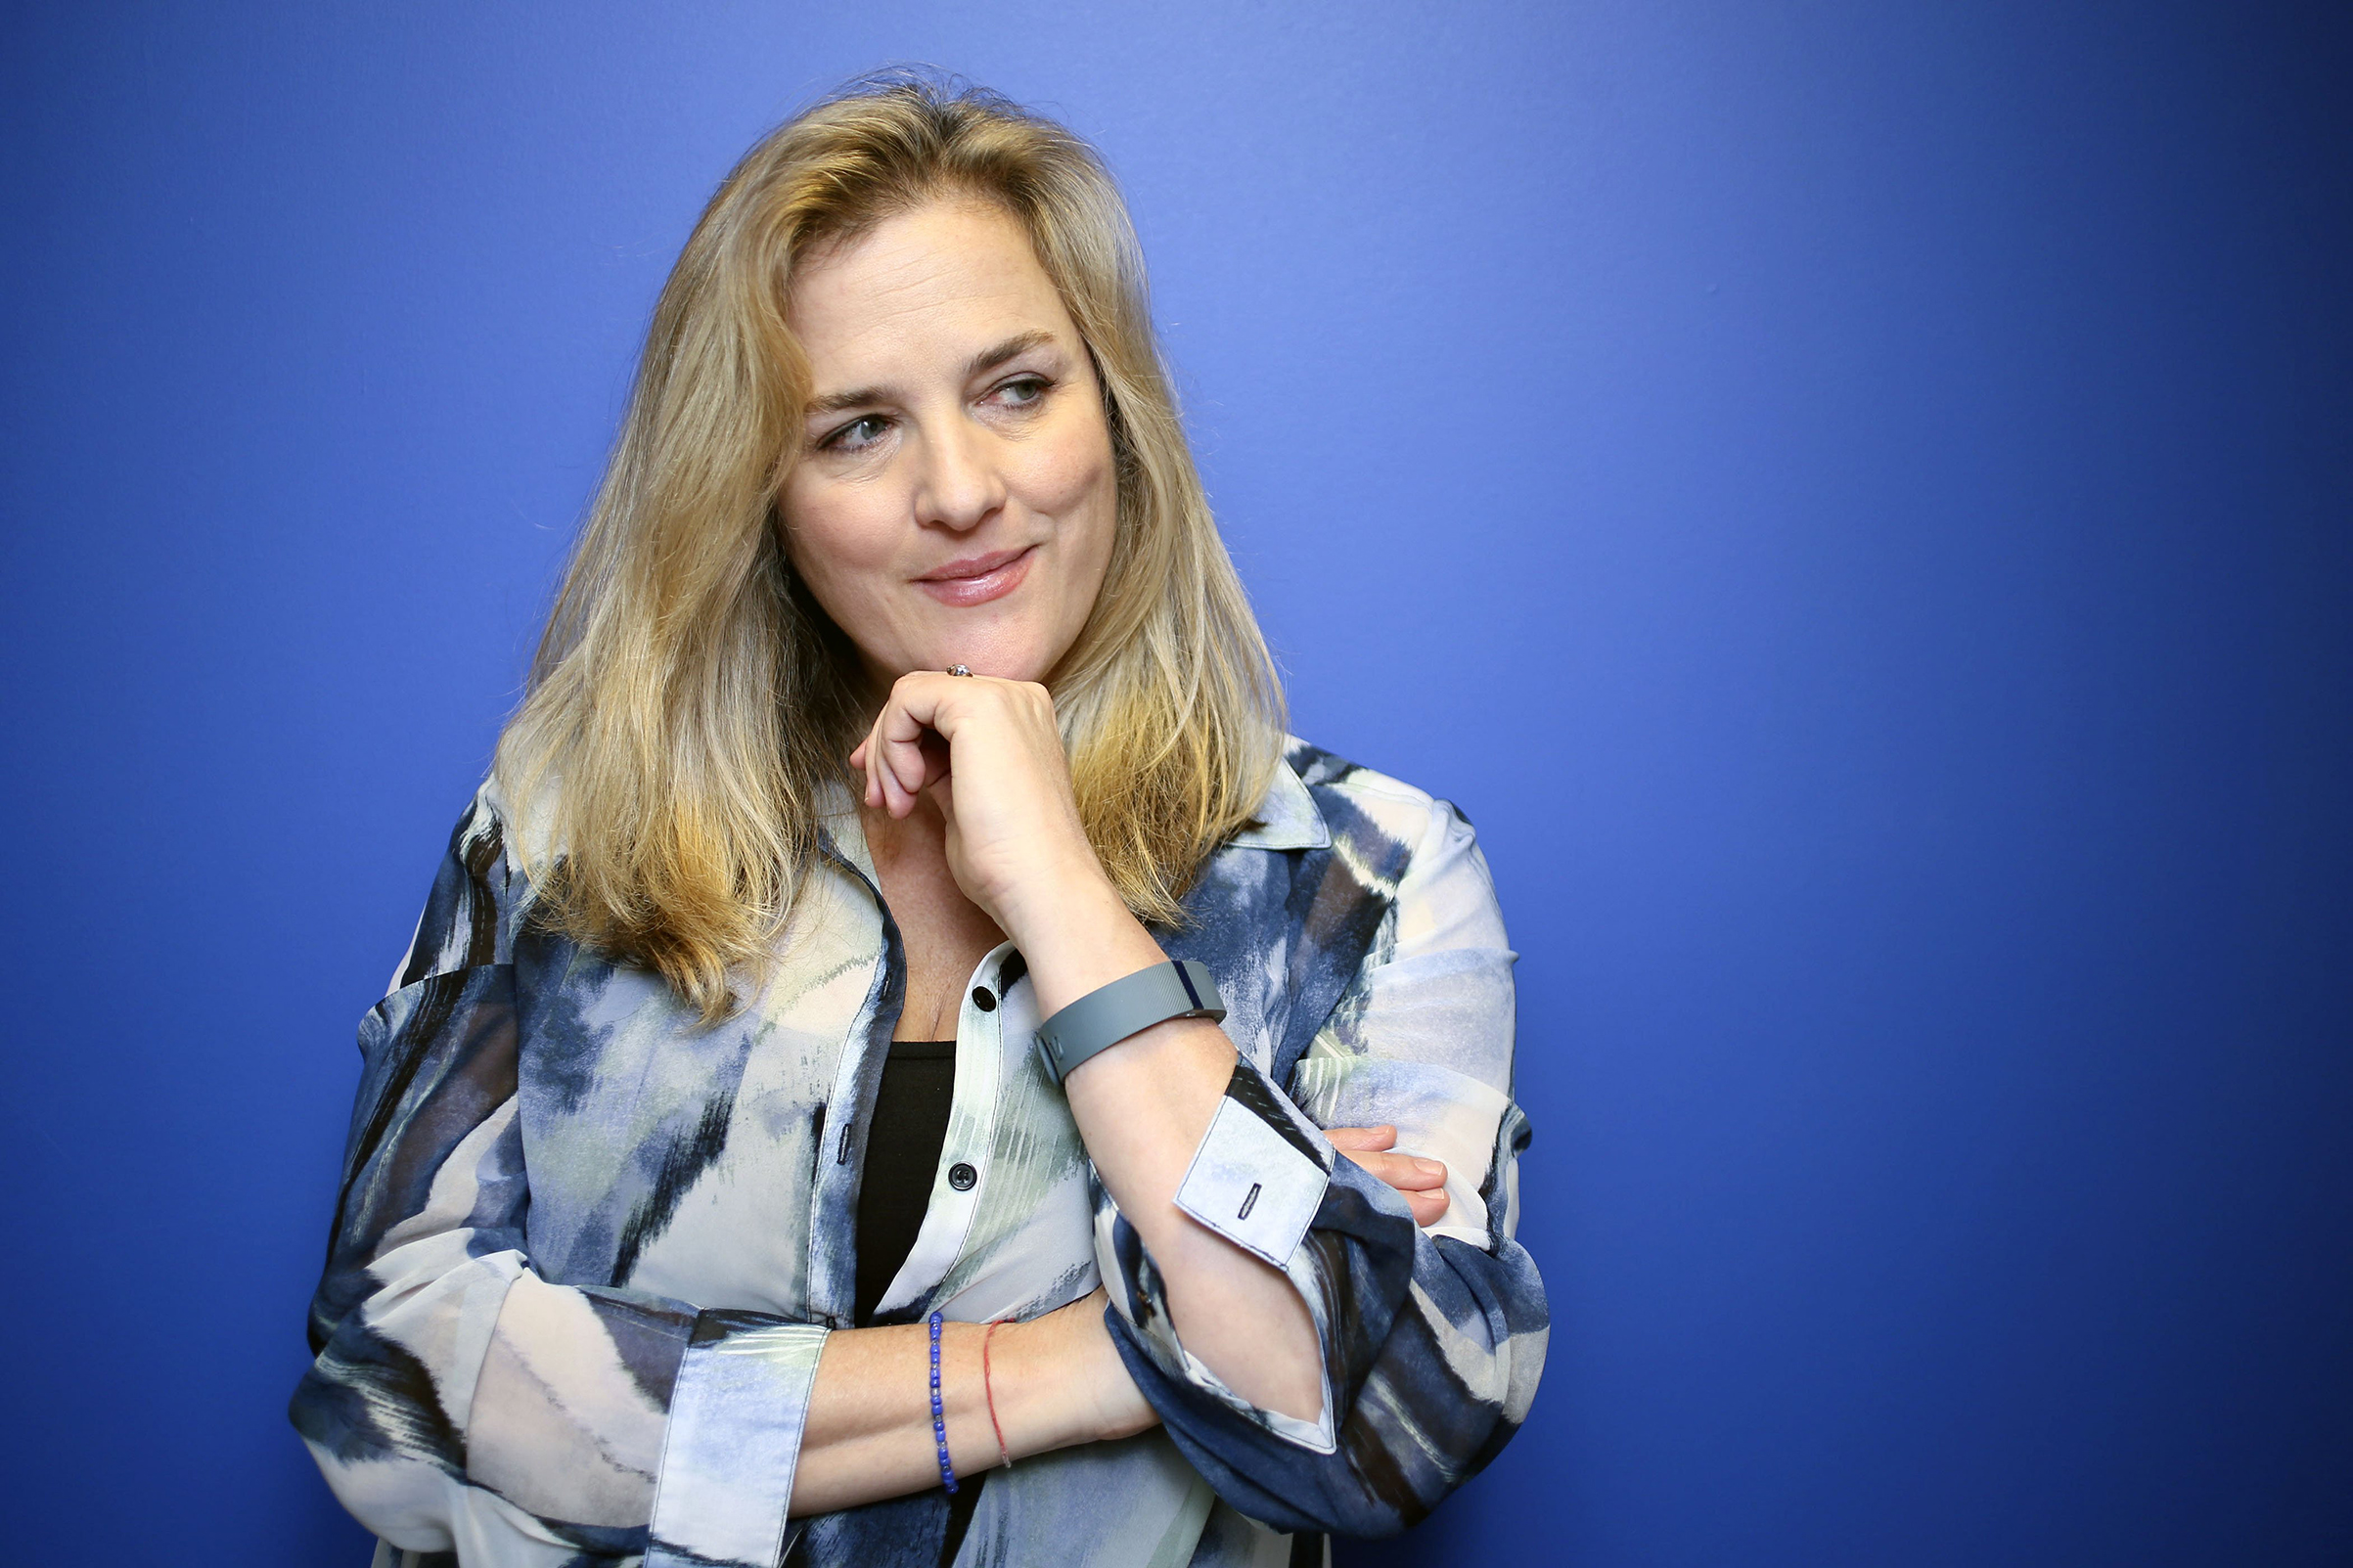 Journalist Natasha Stoynoff poses at the Simon & Schuster offices in downtown Toronto, Jan. 18, 2017. (Andrew Francis Wallace—Toronto Star/Getty Images)